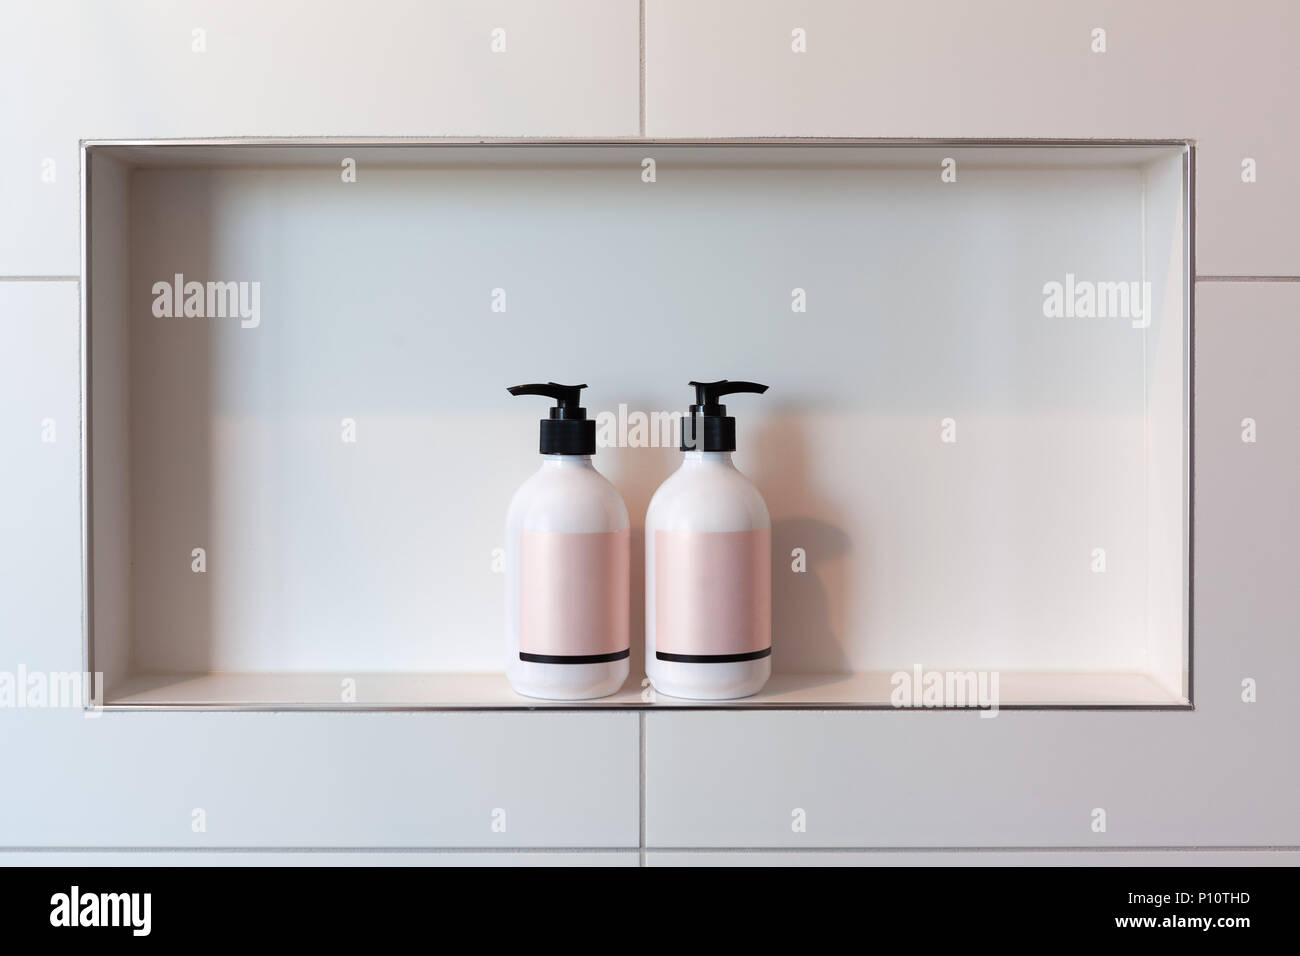 Disagreement concept - two liquid dispensers facing away from each other in shower niche with copy space Stock Photo